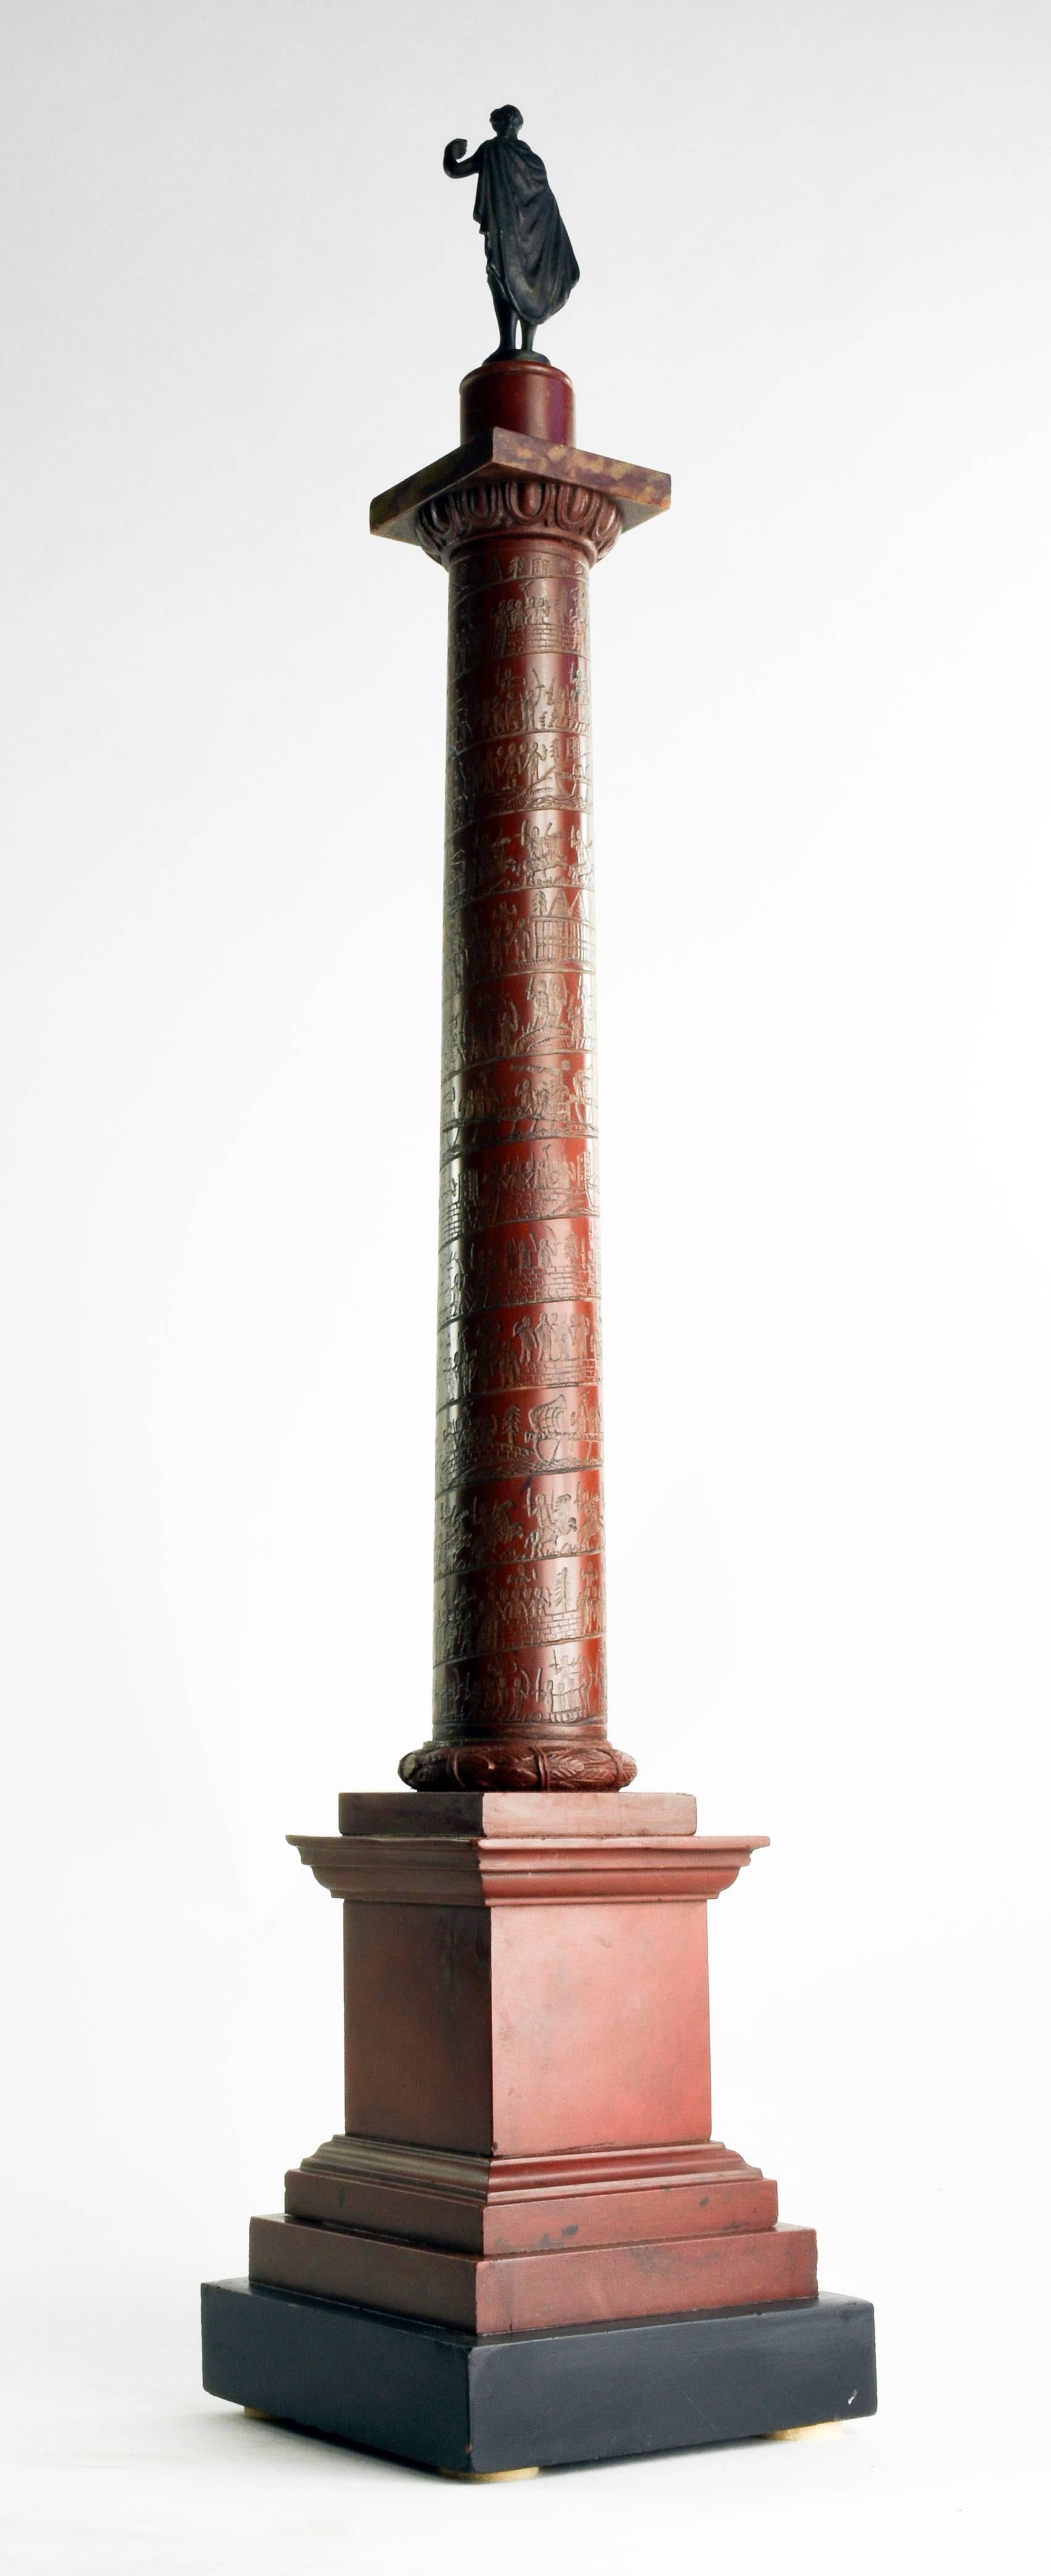 Early 19th century grand tour marble architectural model of Roman column.
Rosso and nero antico marble, with bronze figure.
Rome, circa 1820-1830, Measures: 22” H.

The triumphal column of Trajan, erected in Rome in 113 AD, has long been the subject